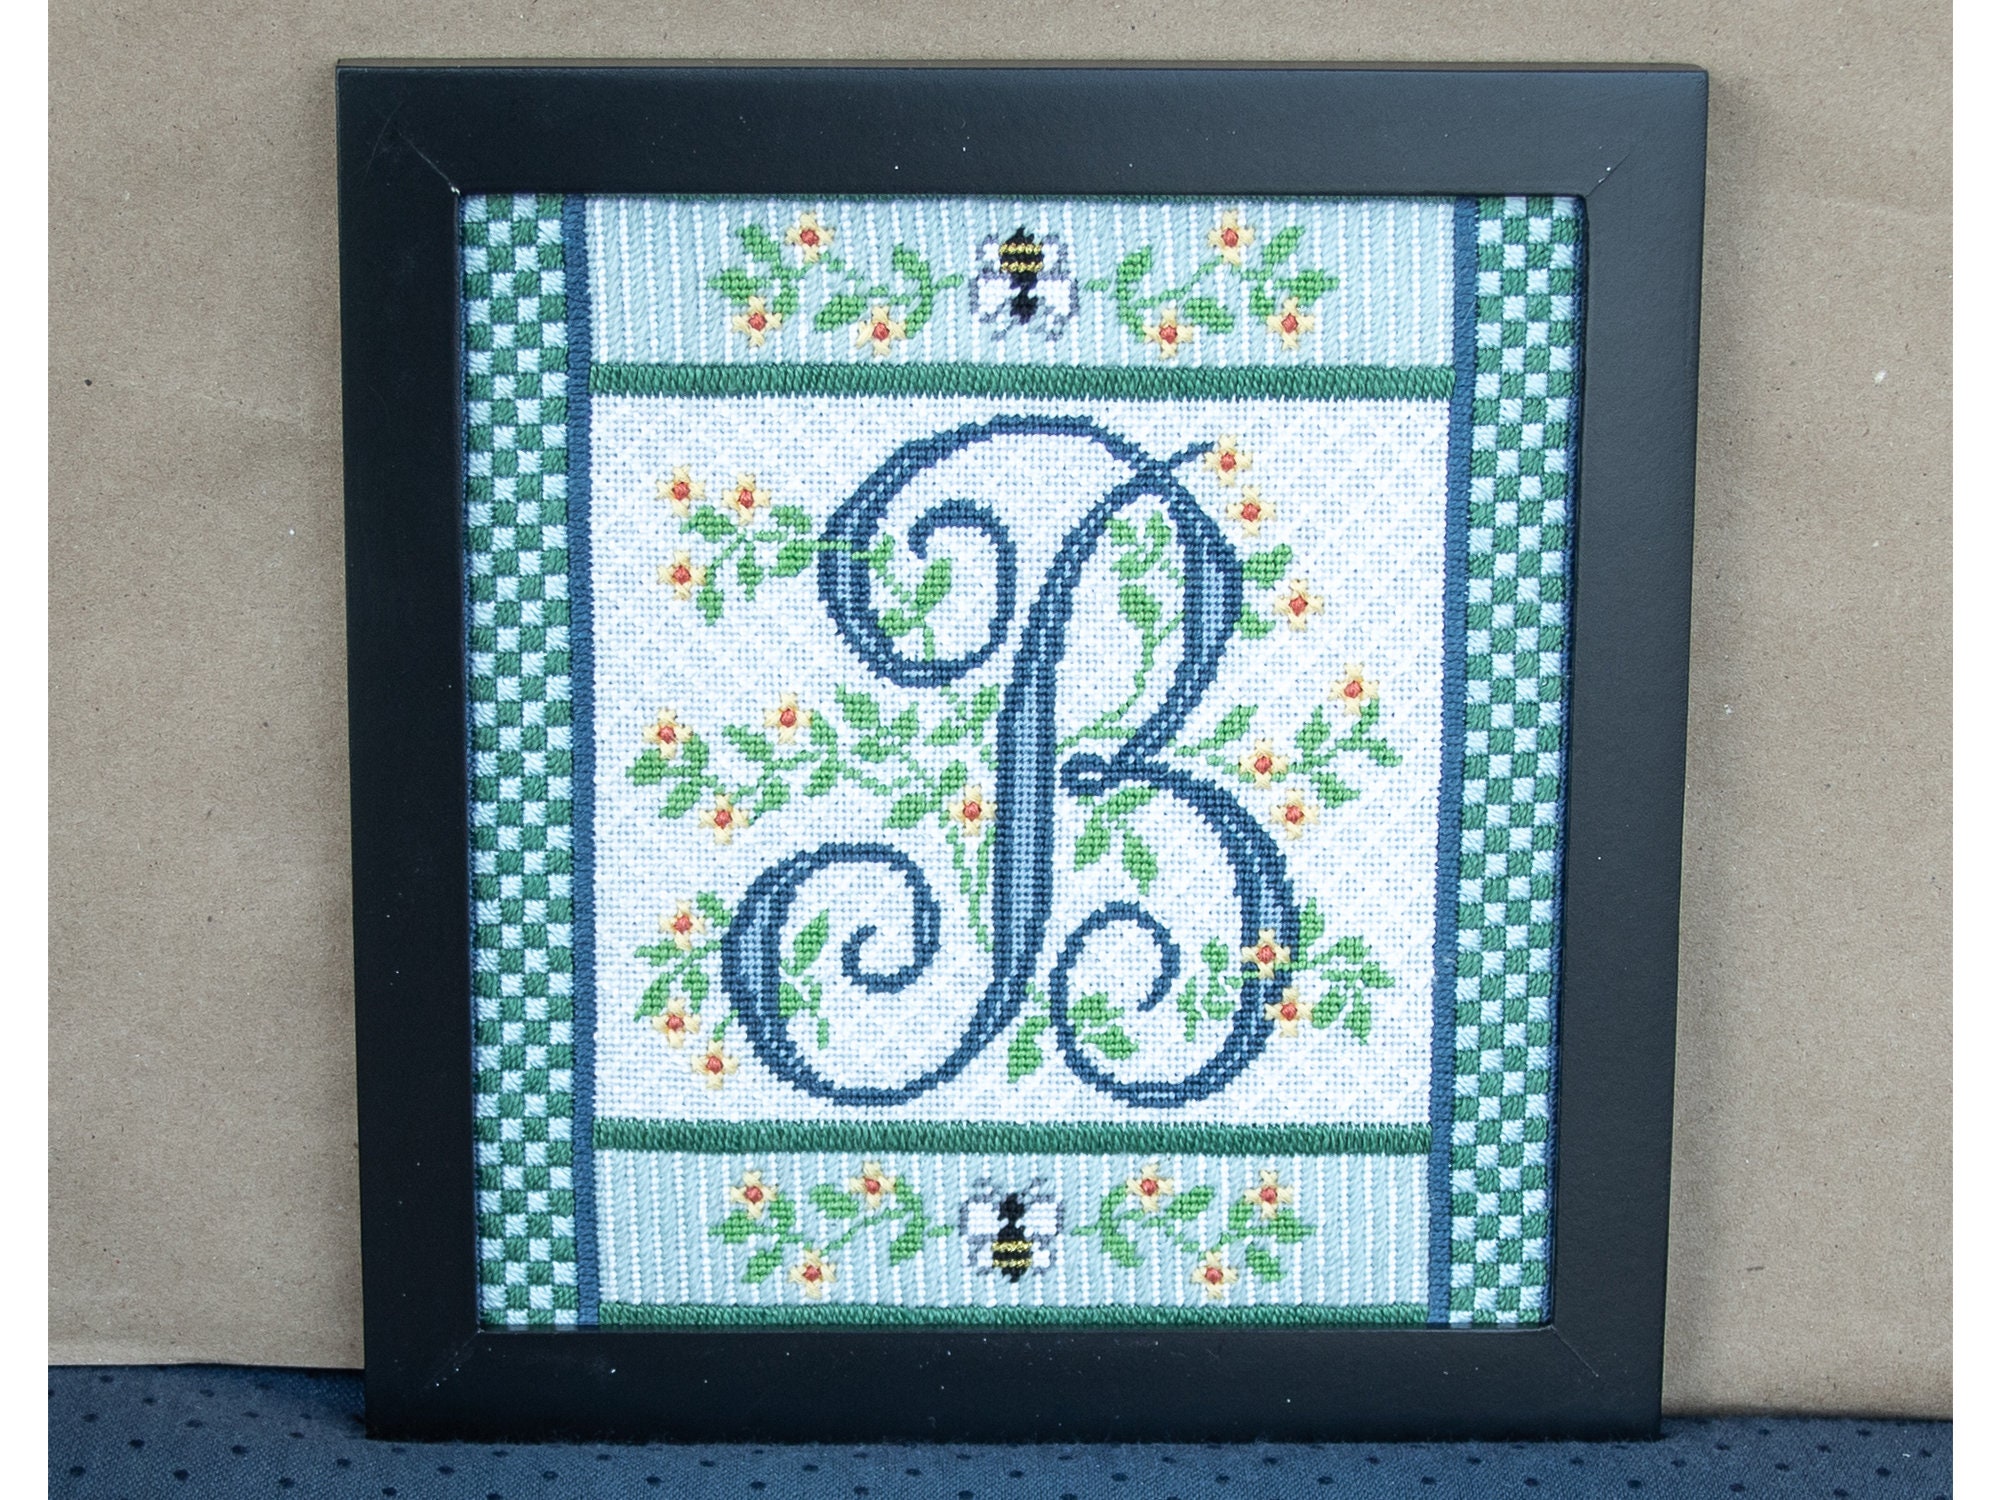 Charming French-Inspired Ribbon with Bee Motif